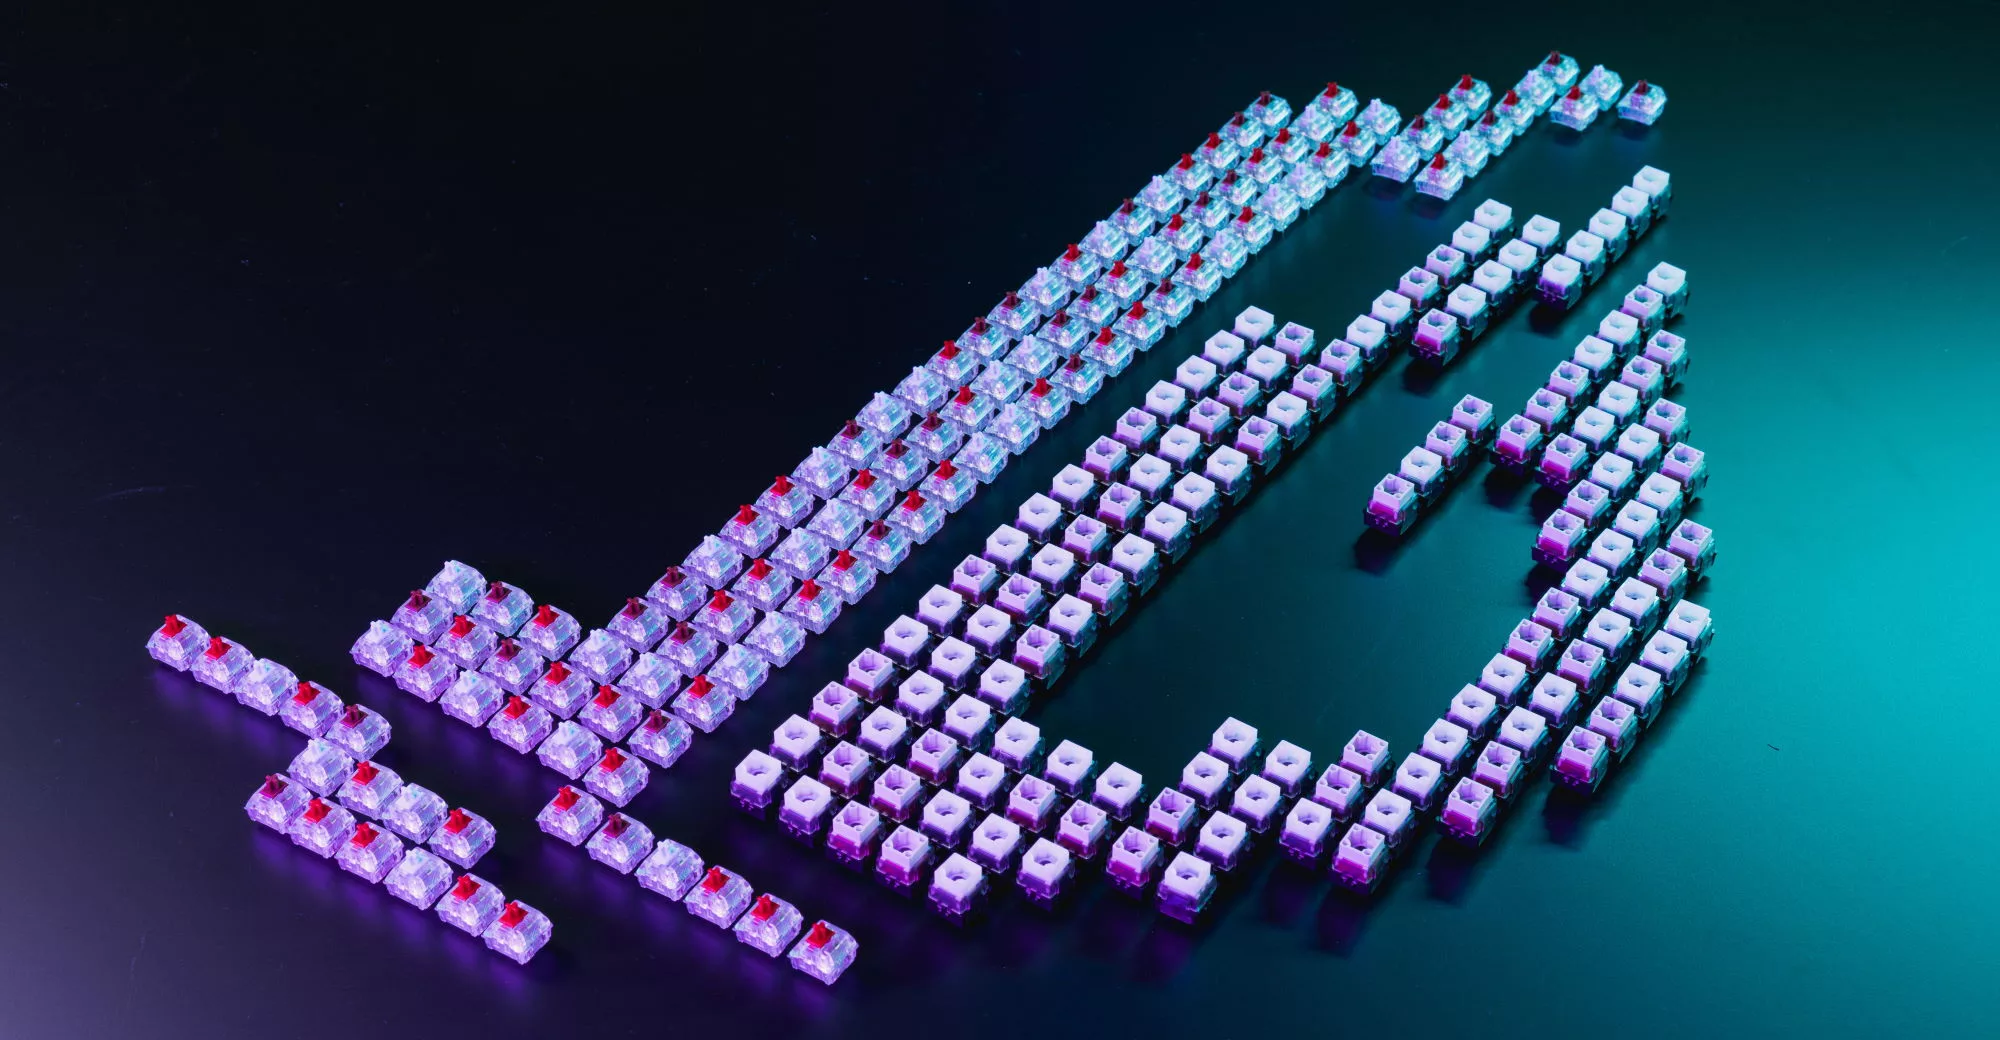 One or two hundred key caps and switches arranged on a table in the shape of the ROG eye logo.